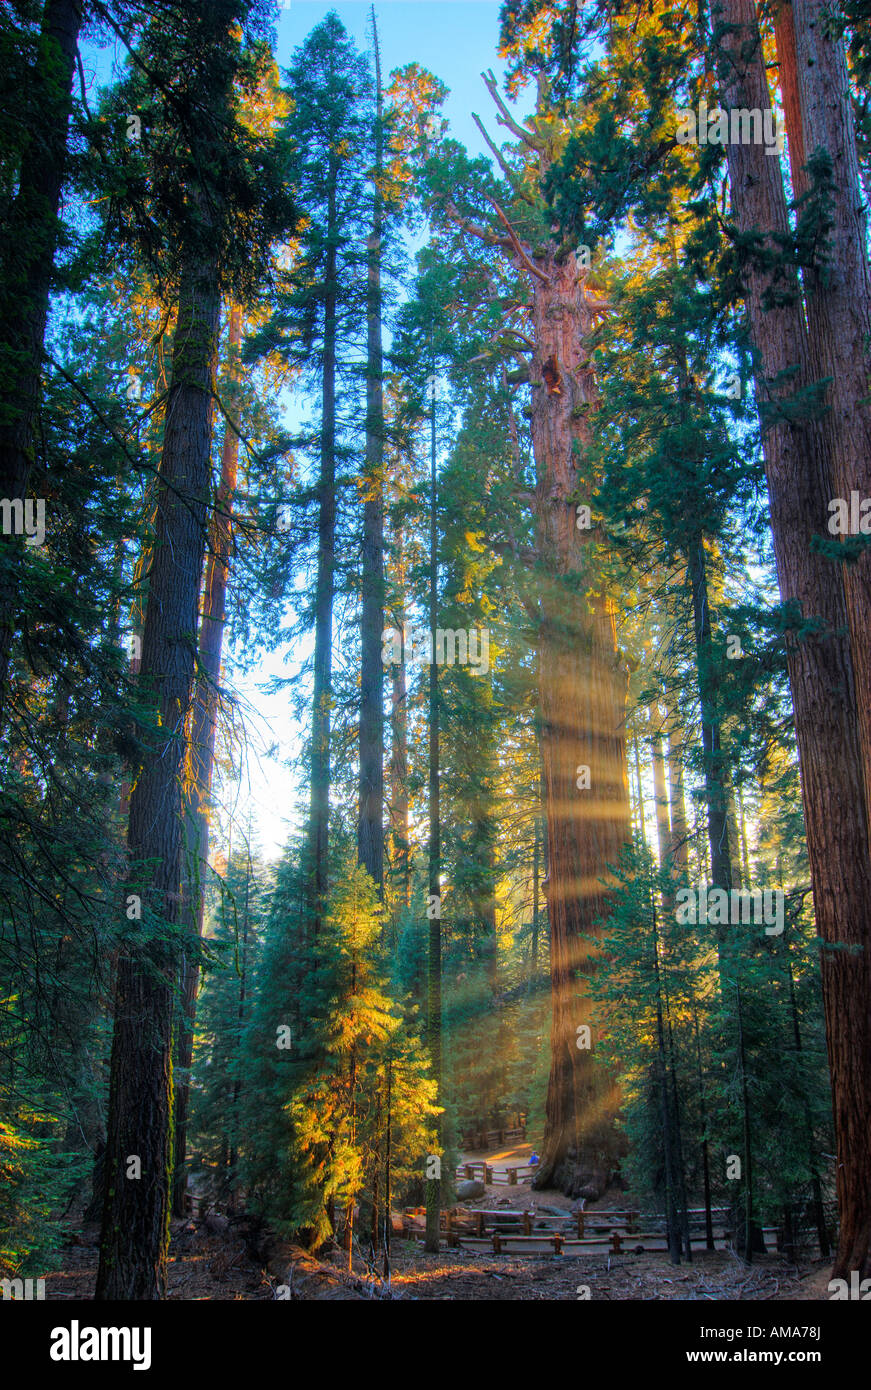 General Sherman Tree in Sequoia National Park. Sunset with sunbeams or godbeams shine through the forest. Stock Photo